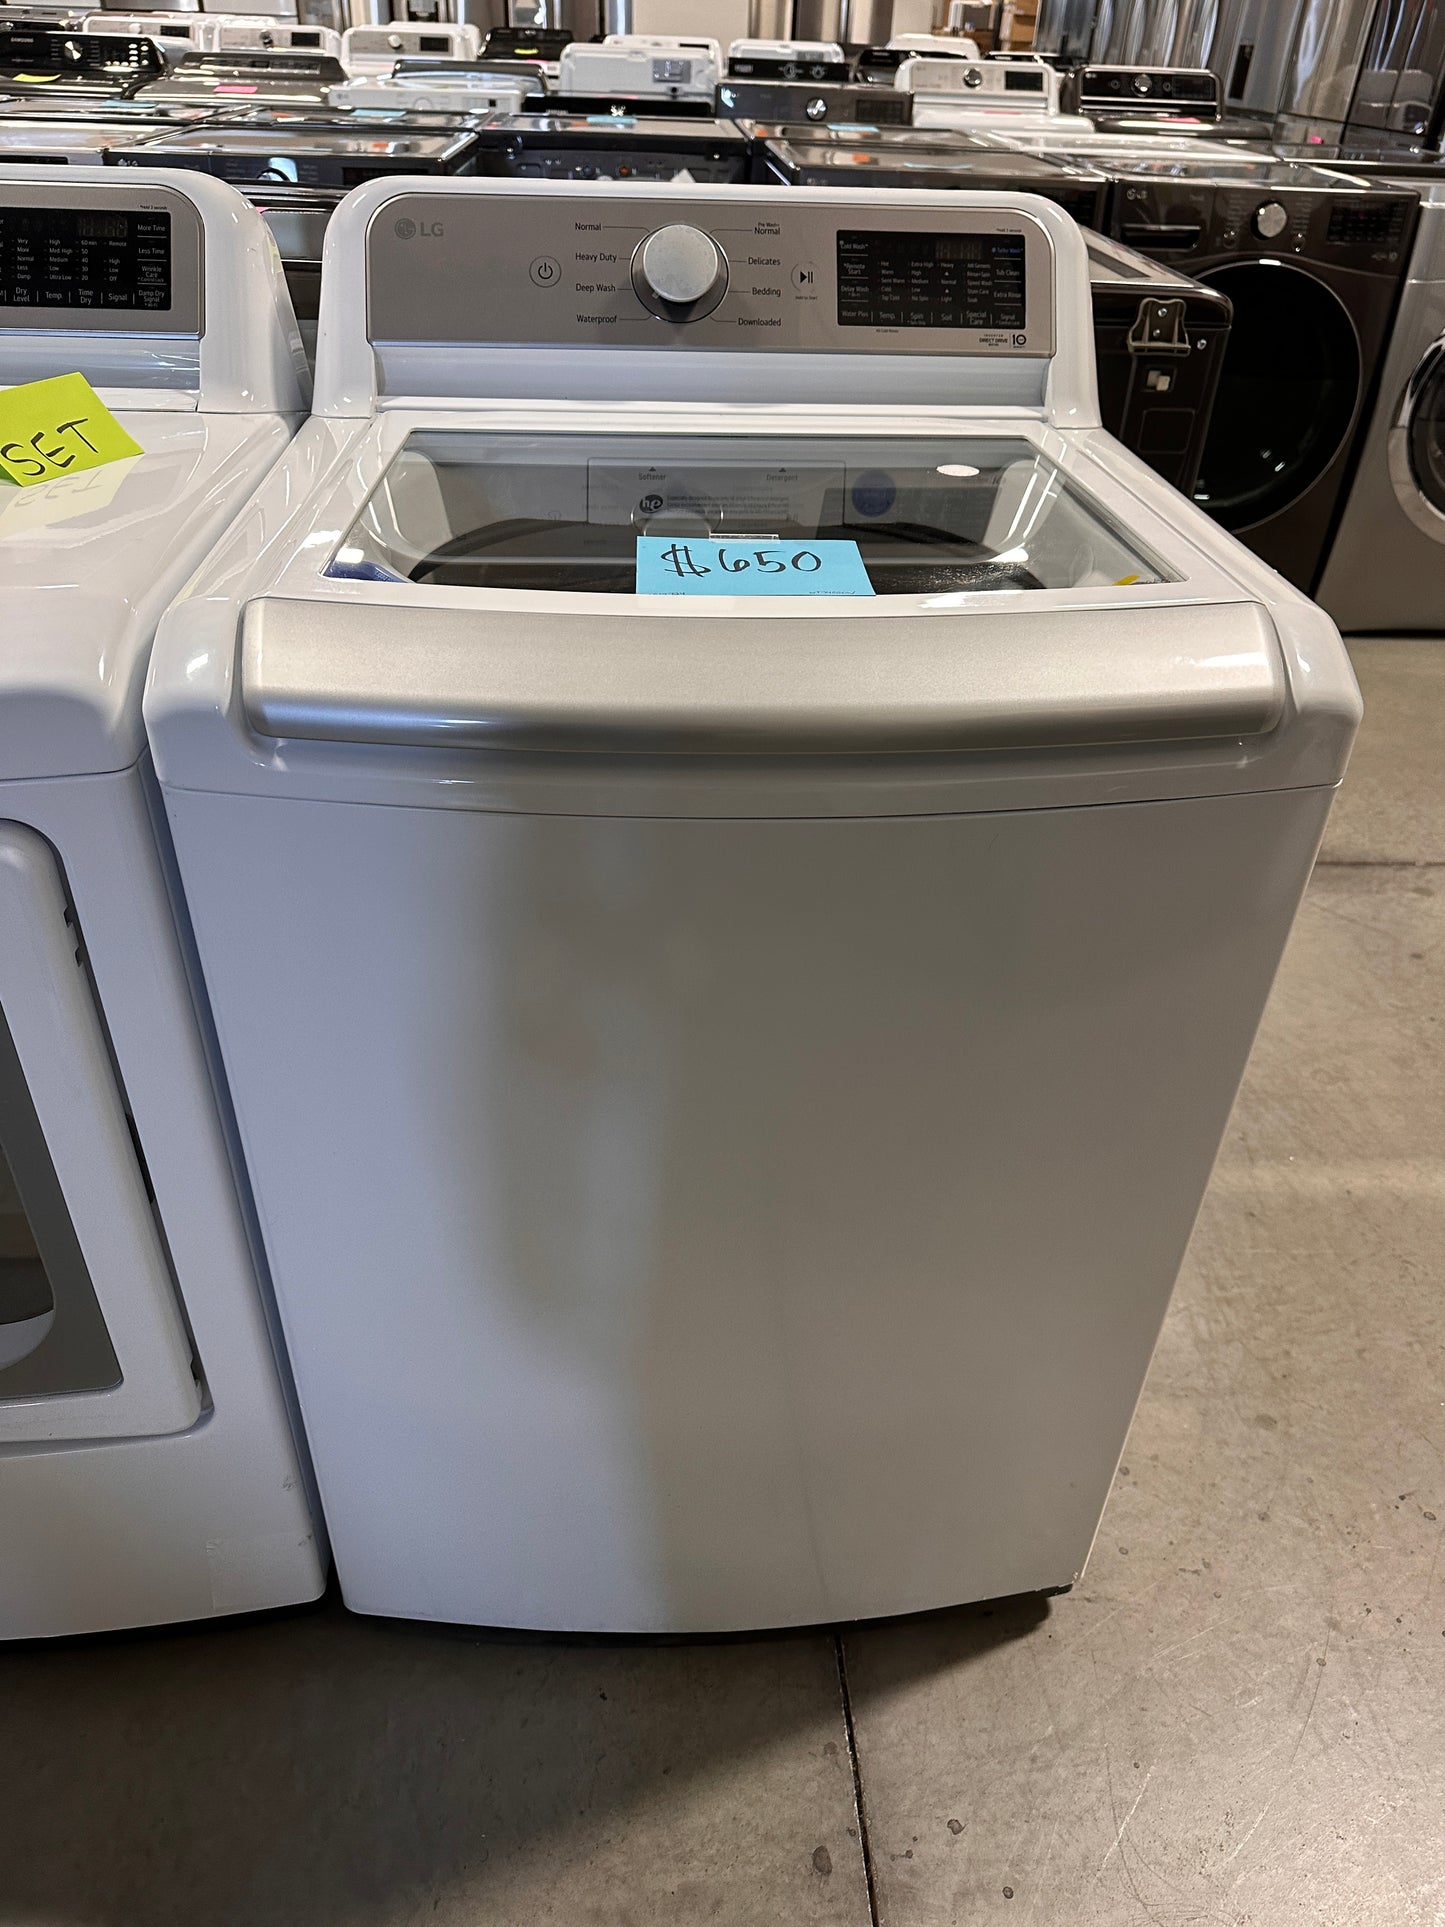 MODEL NUMBER WT7400CW TOP LOAD LG WASHING MACHINE - WAS12724